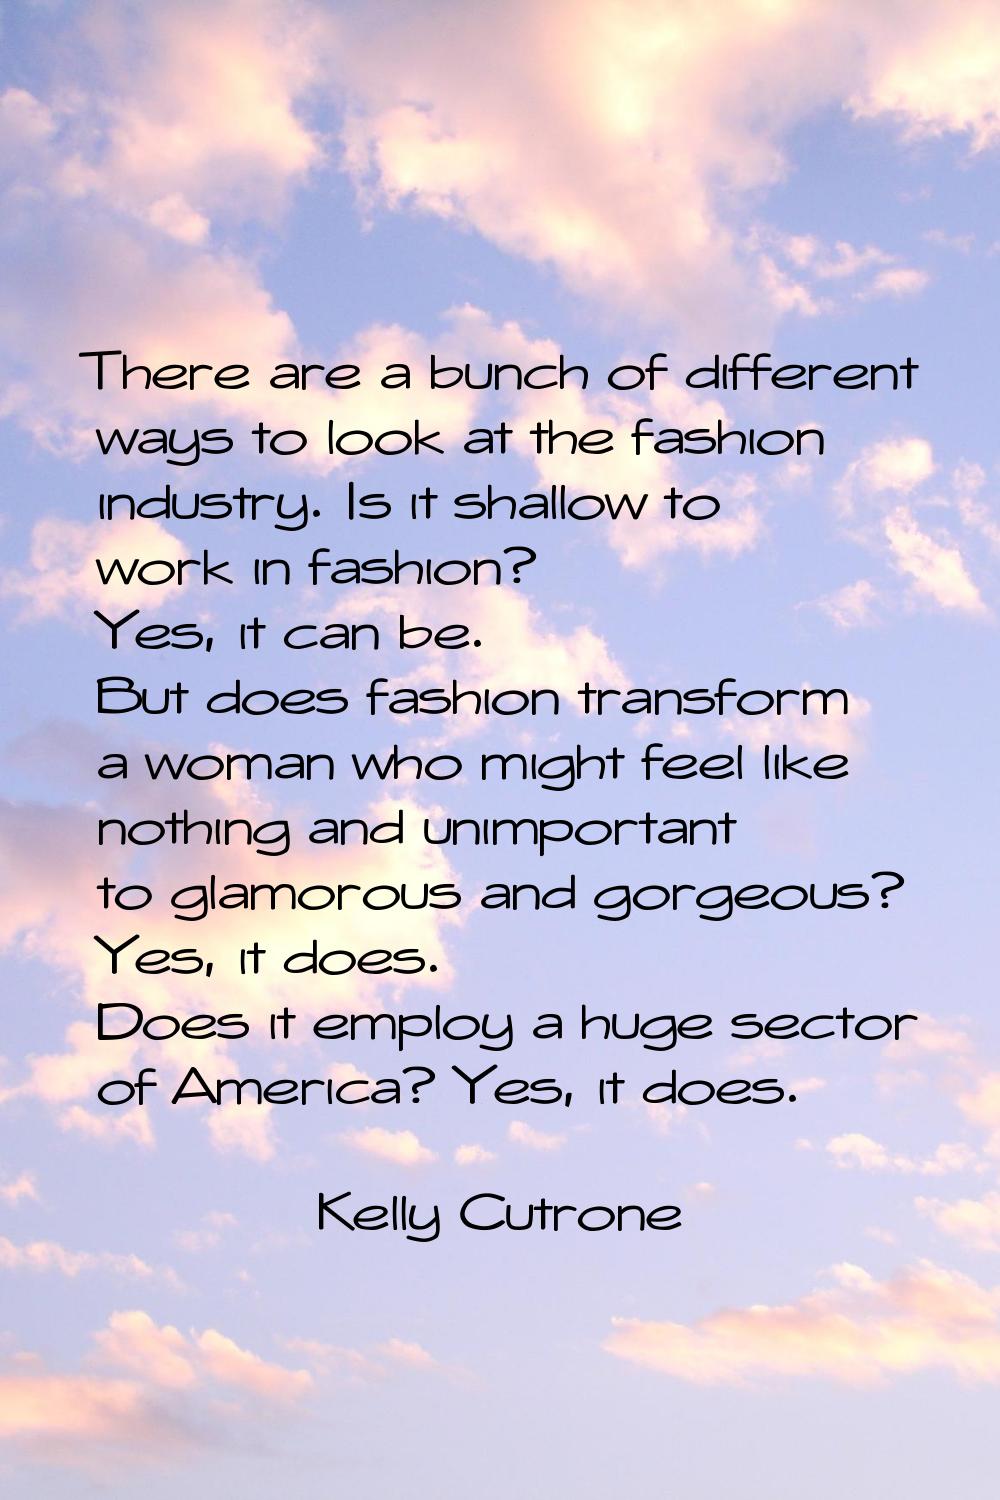 There are a bunch of different ways to look at the fashion industry. Is it shallow to work in fashi